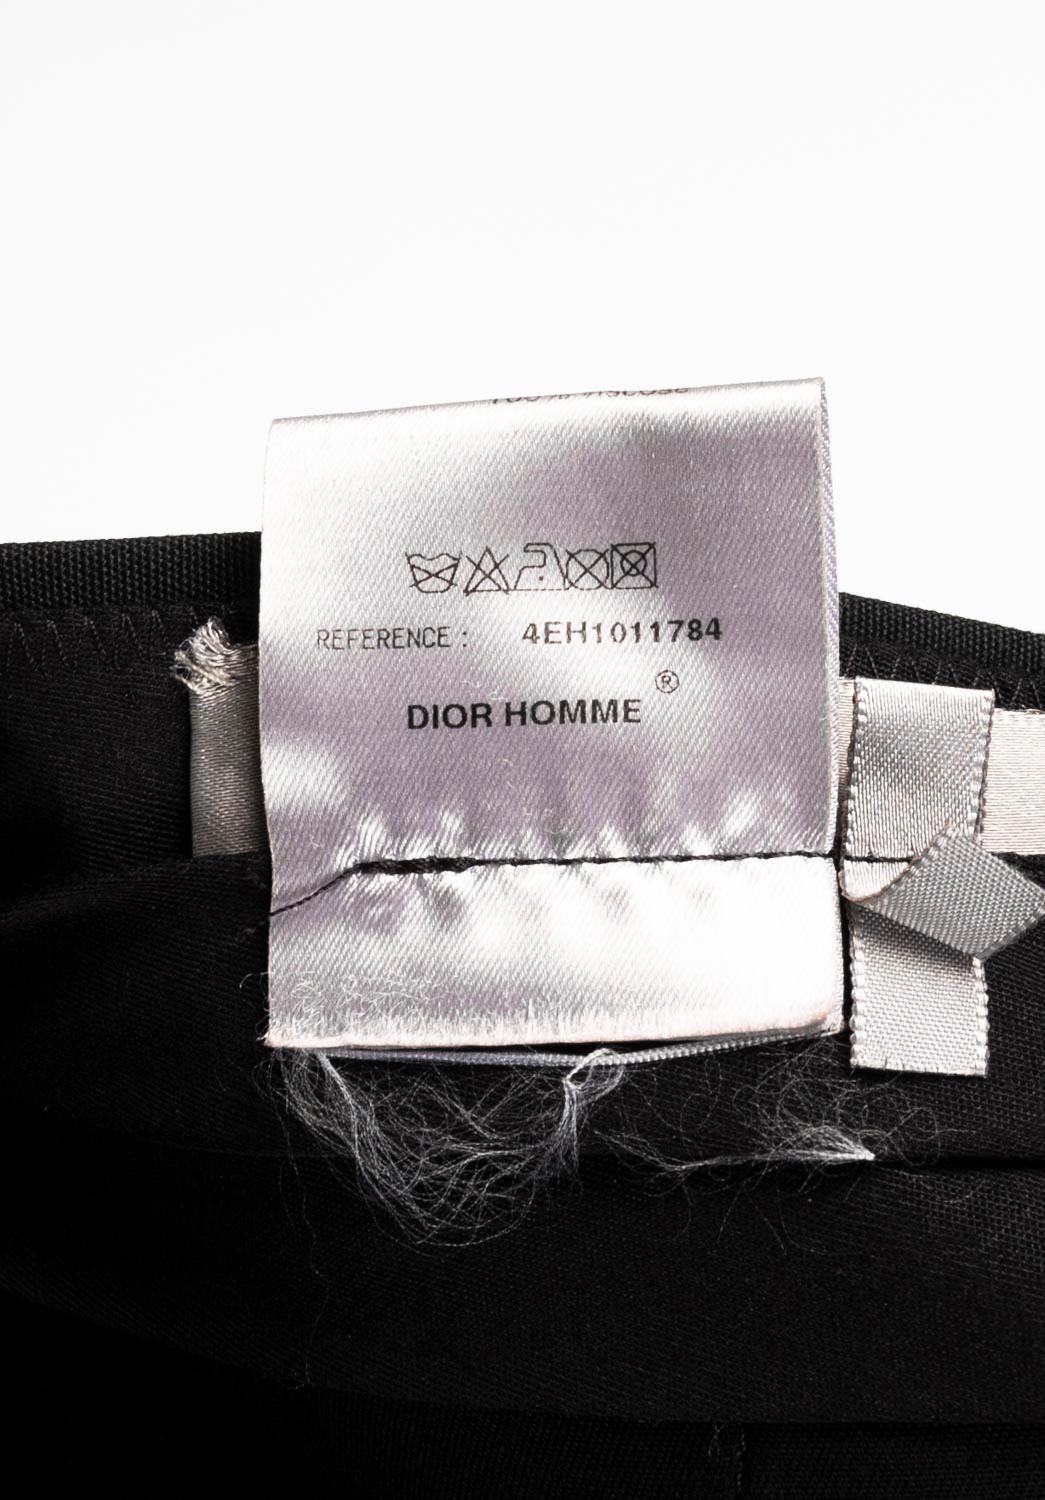 Dior Homme Men Trousers SS04 by Hedi Slimane Dress Pants, ITA Size 46 (M) For Sale 2